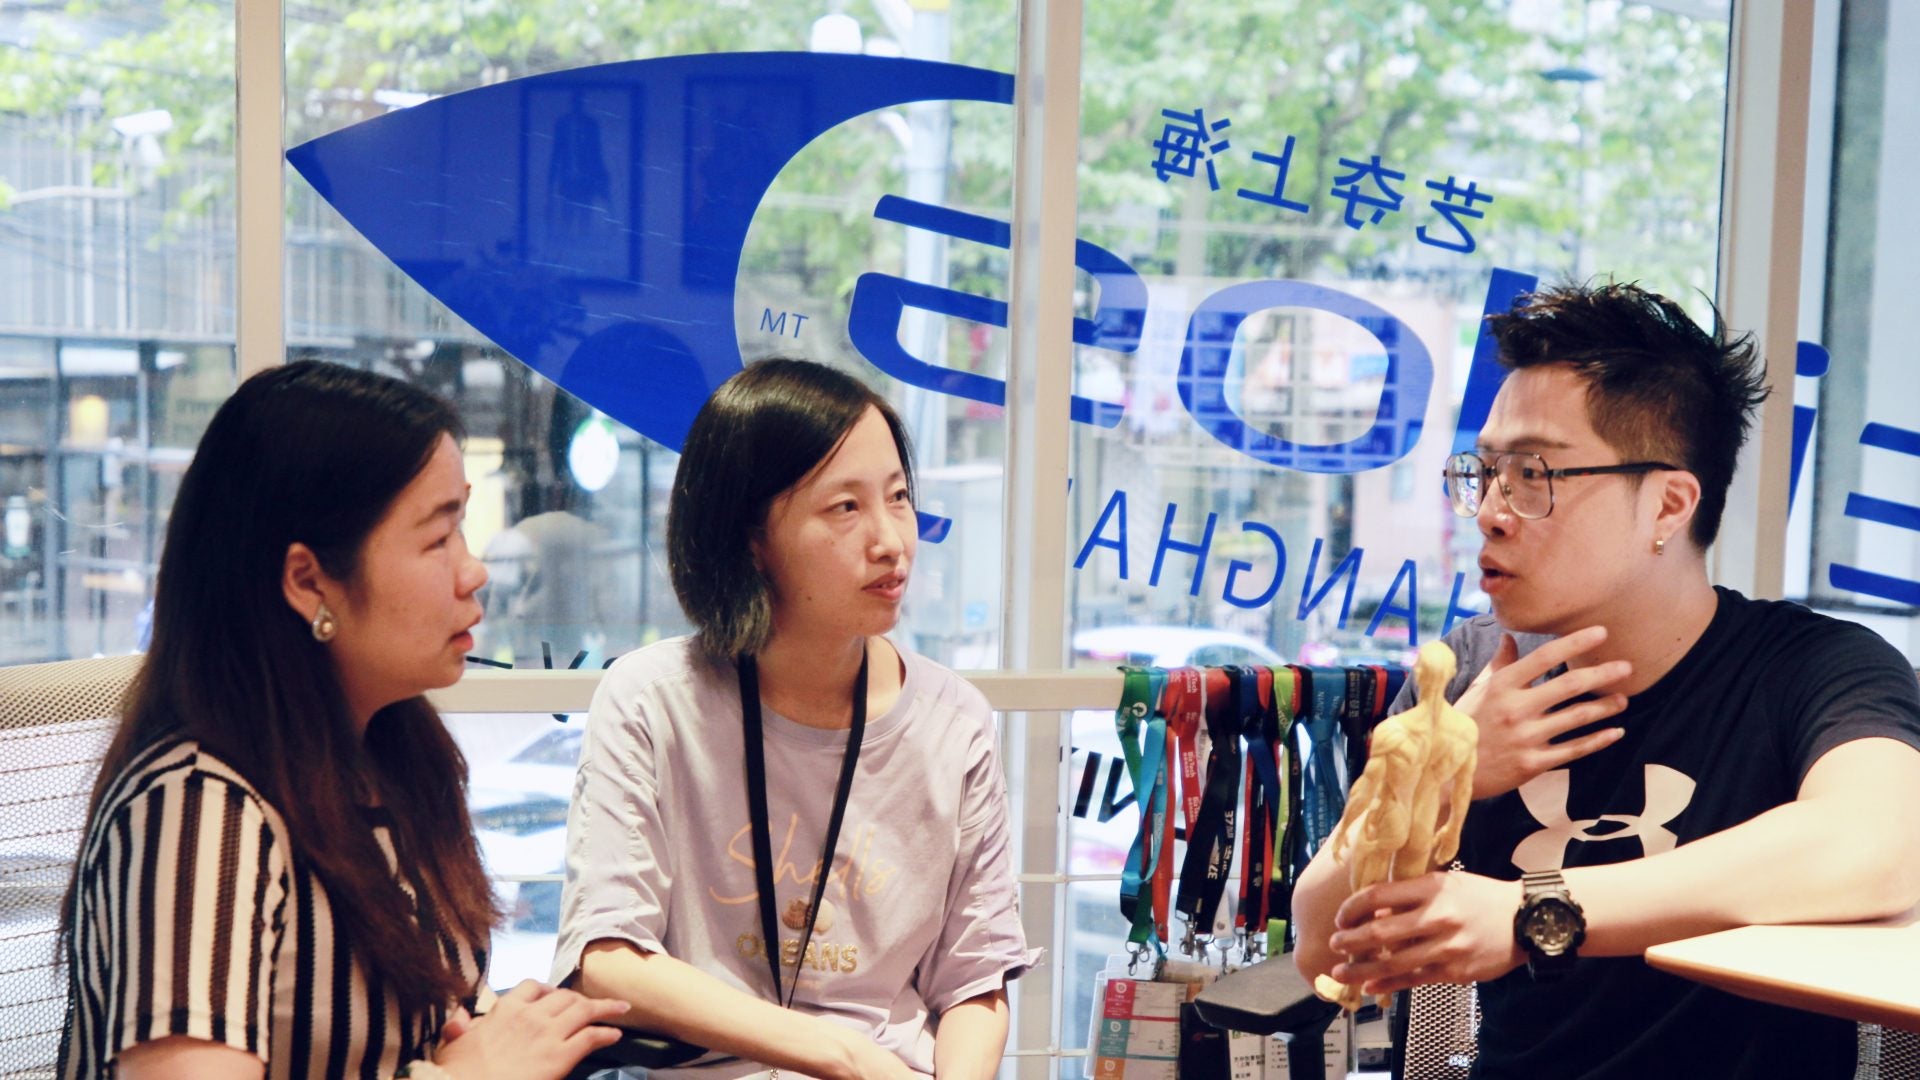 People talking in front of a window with the Eidos Shanghai logo on it